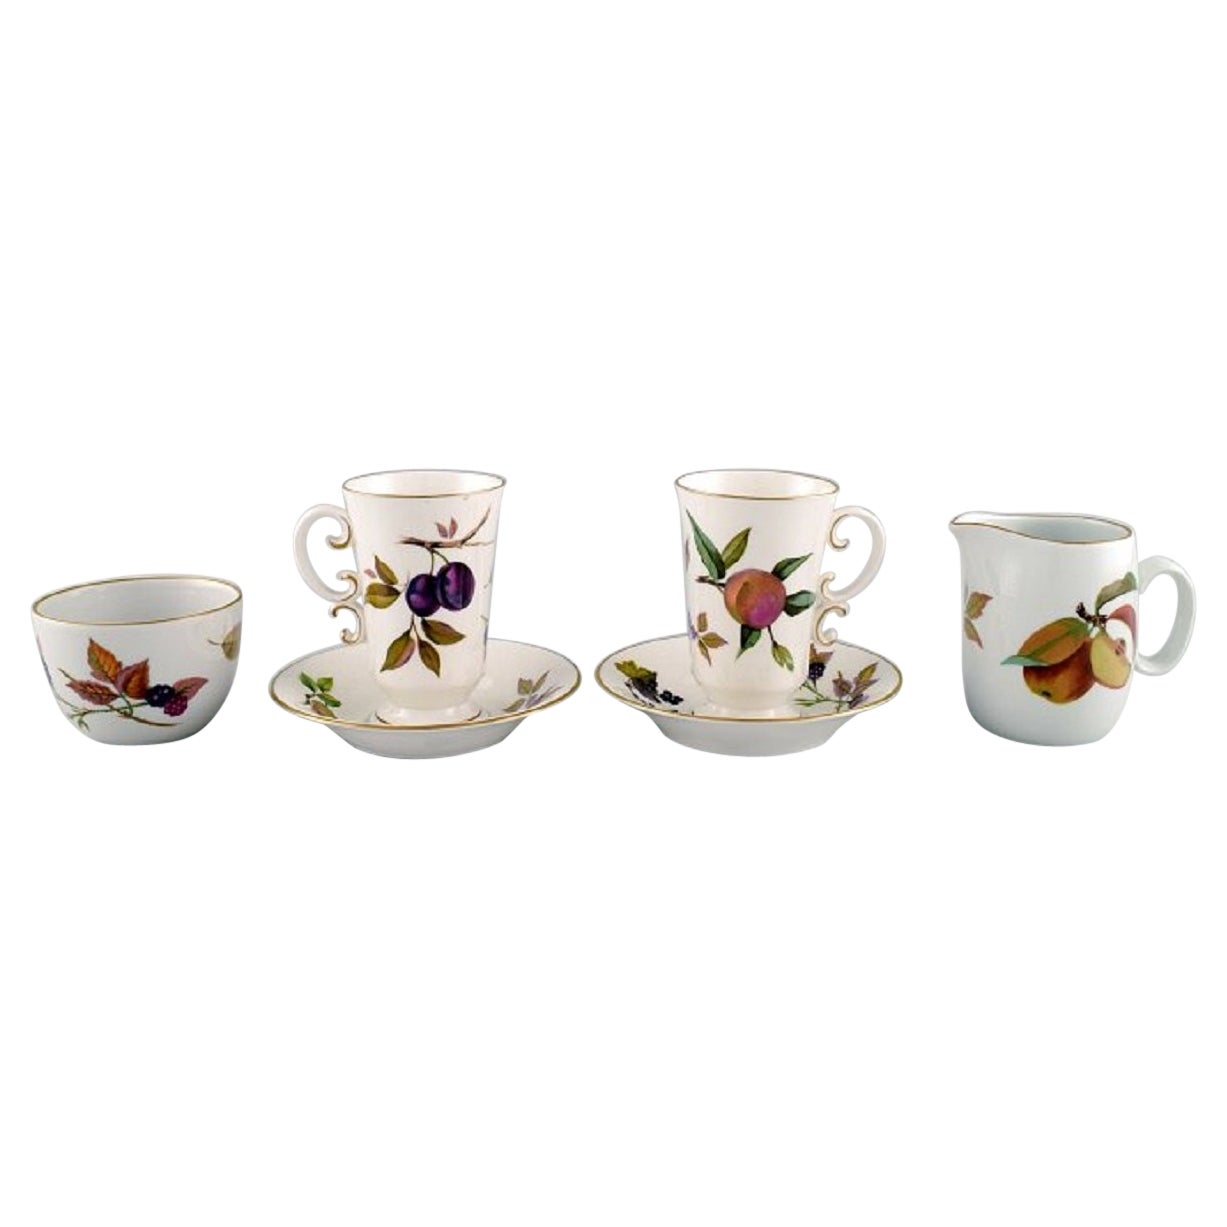 Royal Worcester, England, Coffee Cups & Saucers, Sugar Bowl, Cream Jug For Sale